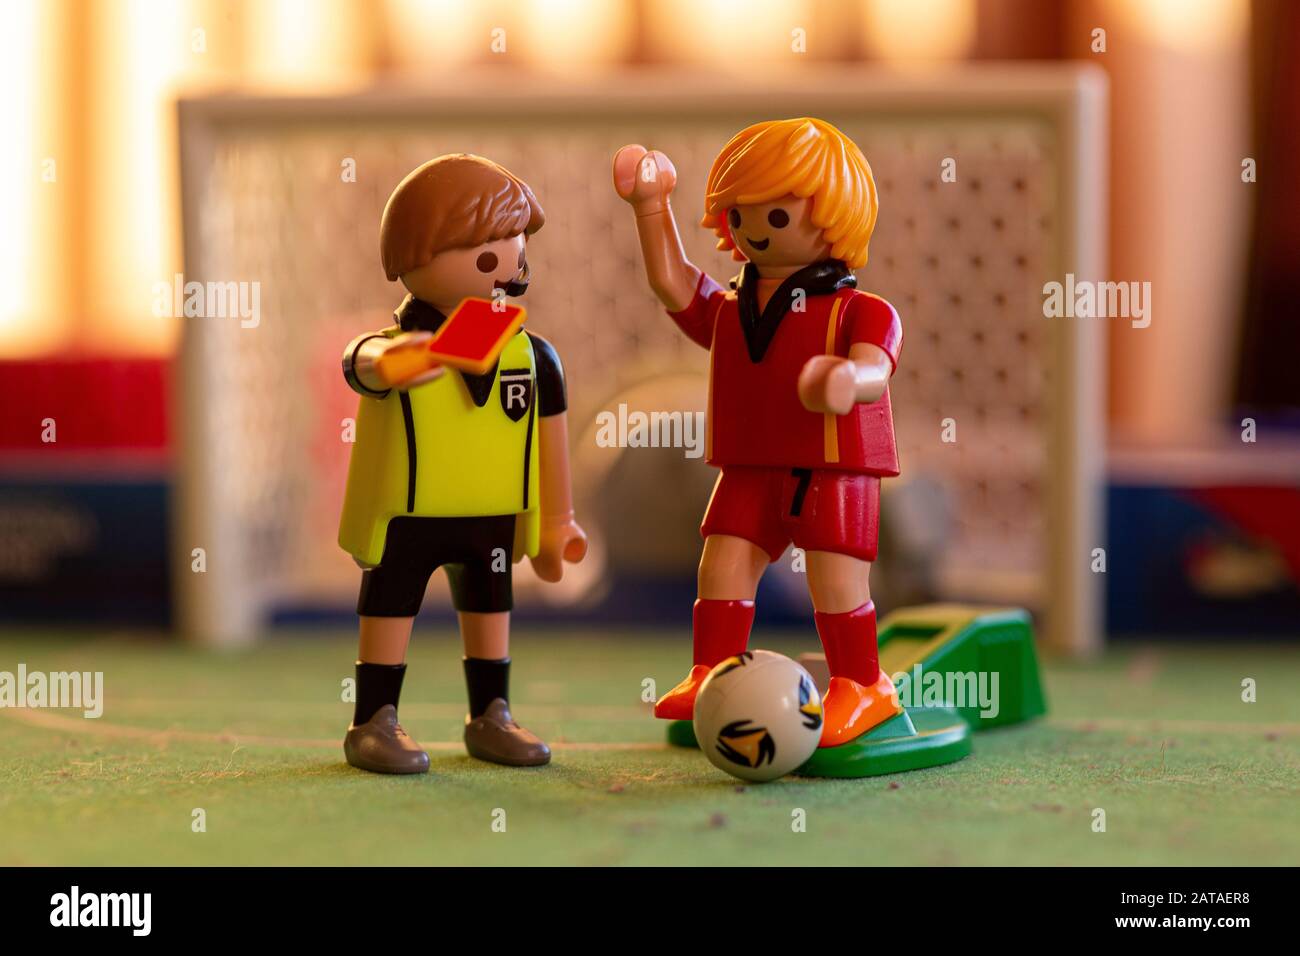 Playmobil referee figure showing red card to player Stock Photo